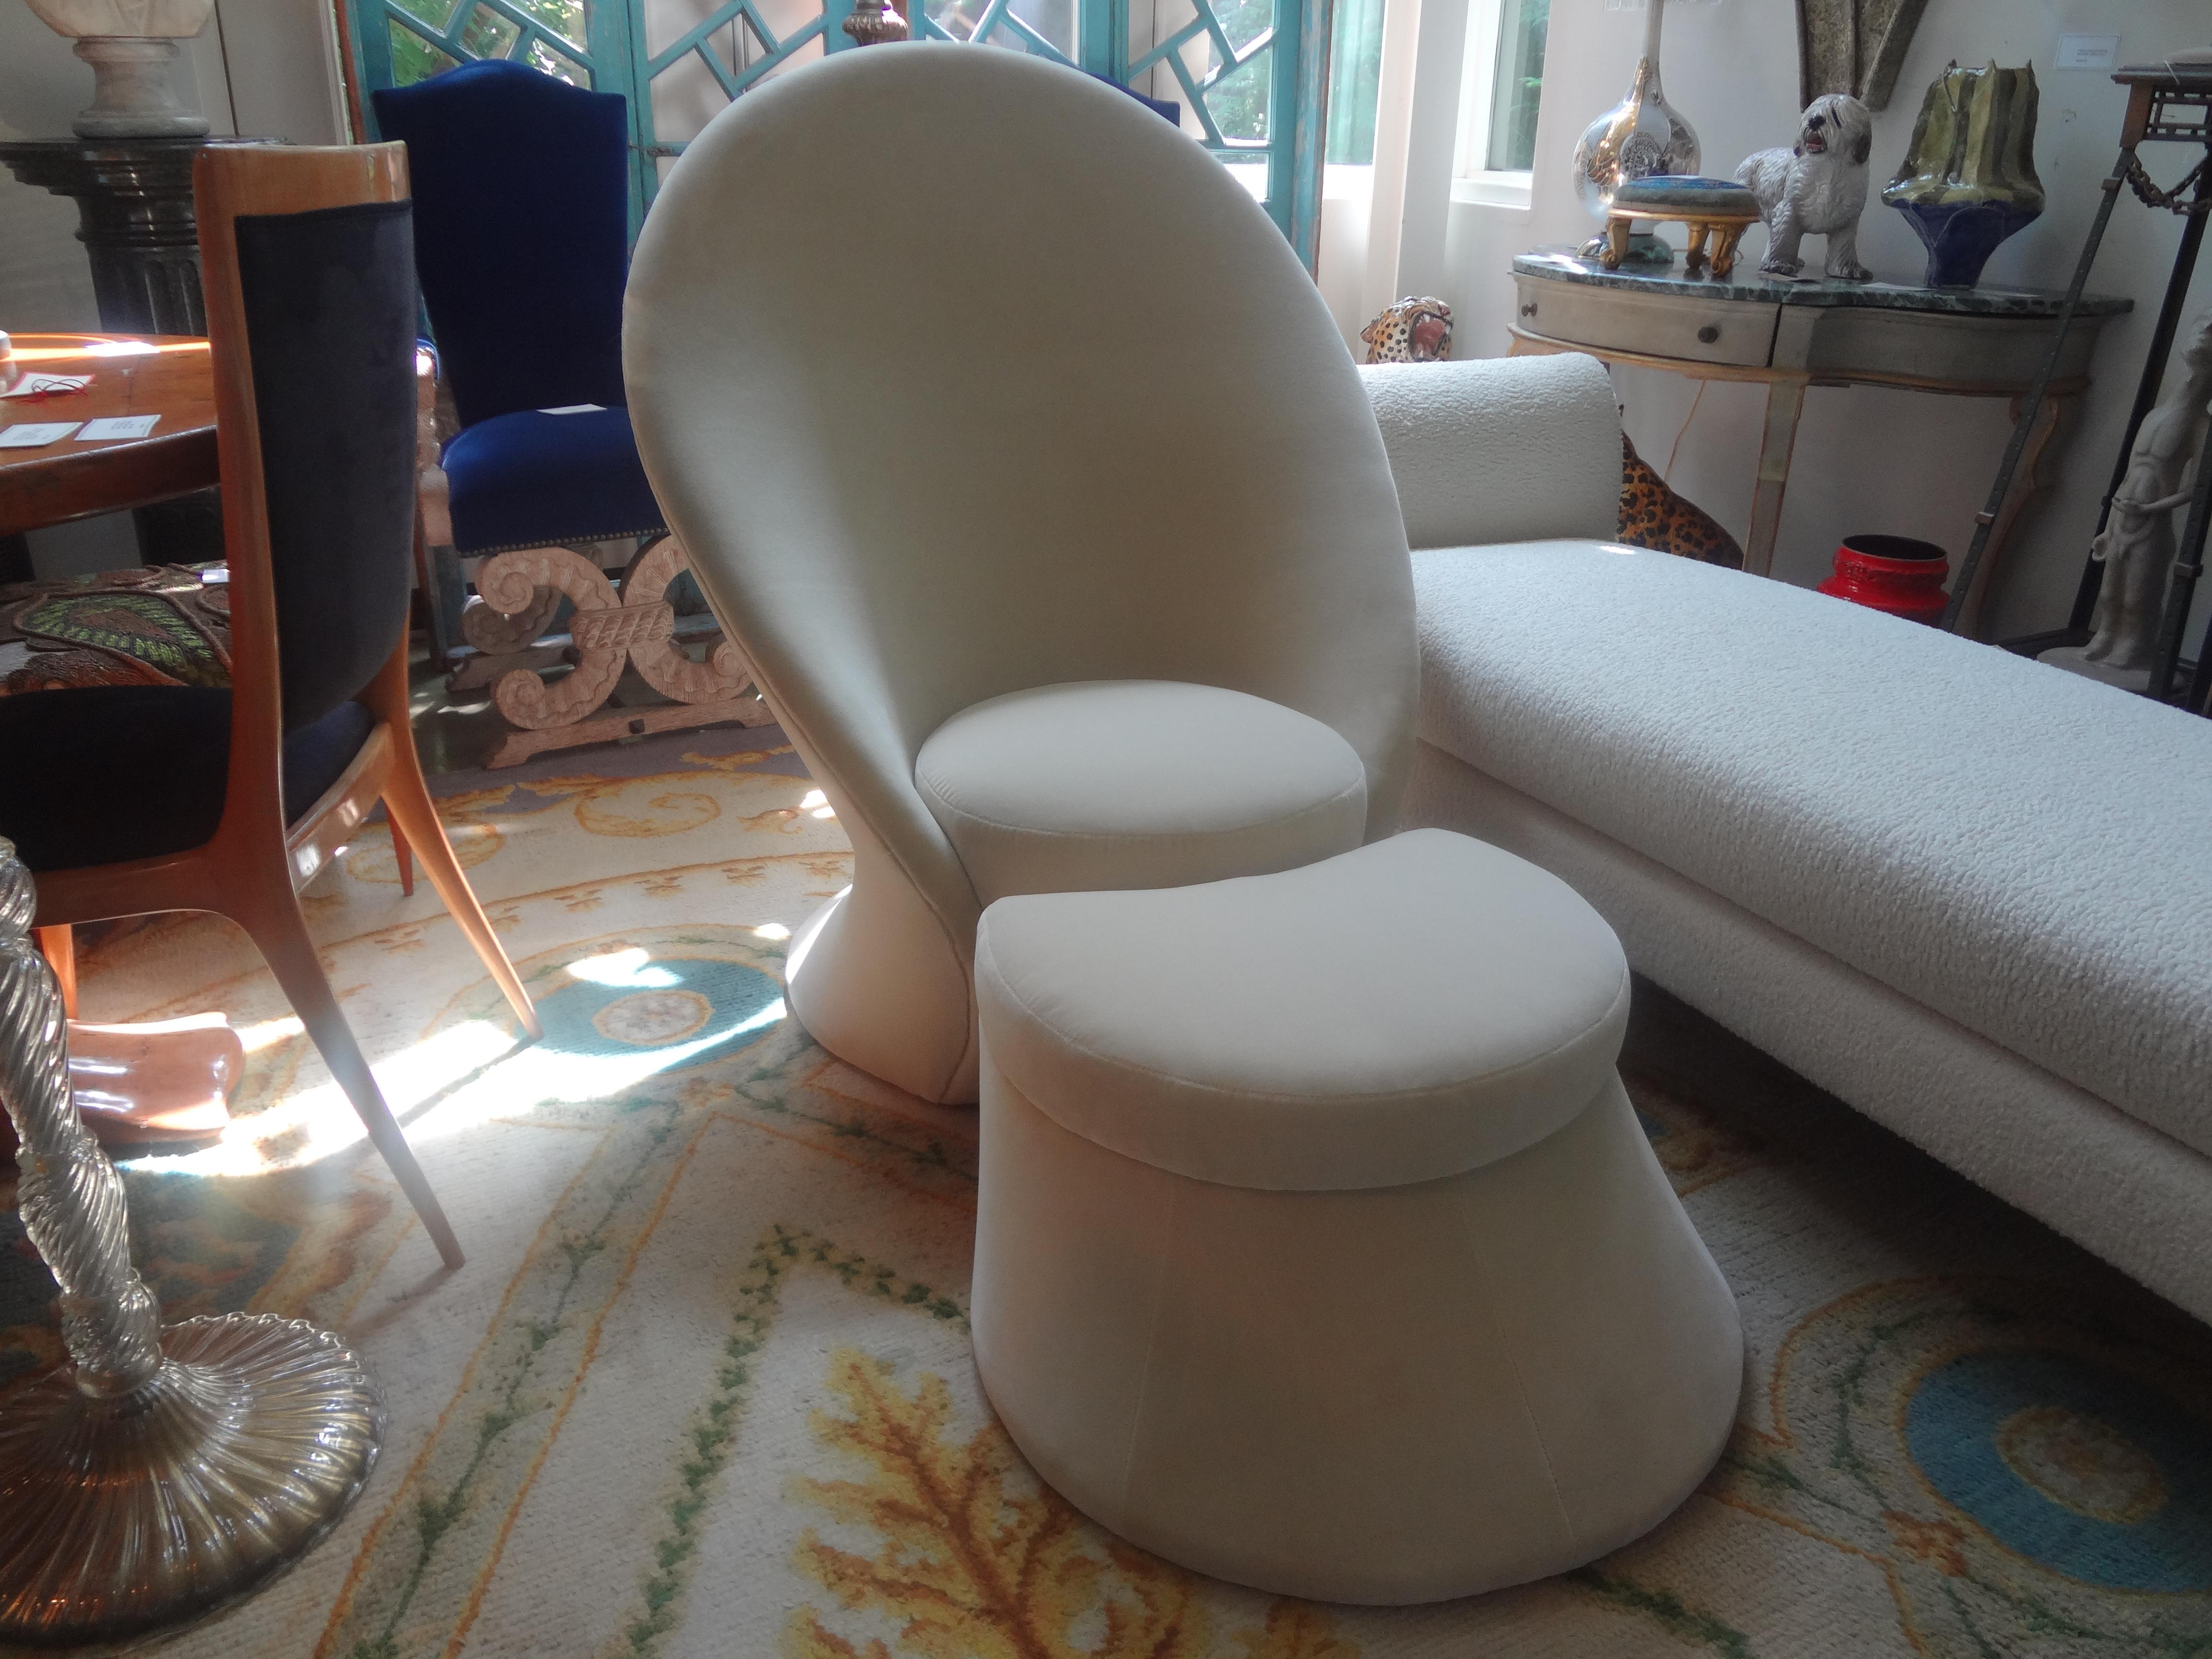 Italian Gio Ponti inspired sculptural chair and ottoman. This stunning Italian modern design set consists of a scooped out chair and appropriately accompanying ottoman. Extremely comfortable and recently upholstered in a neutral low pile mohair